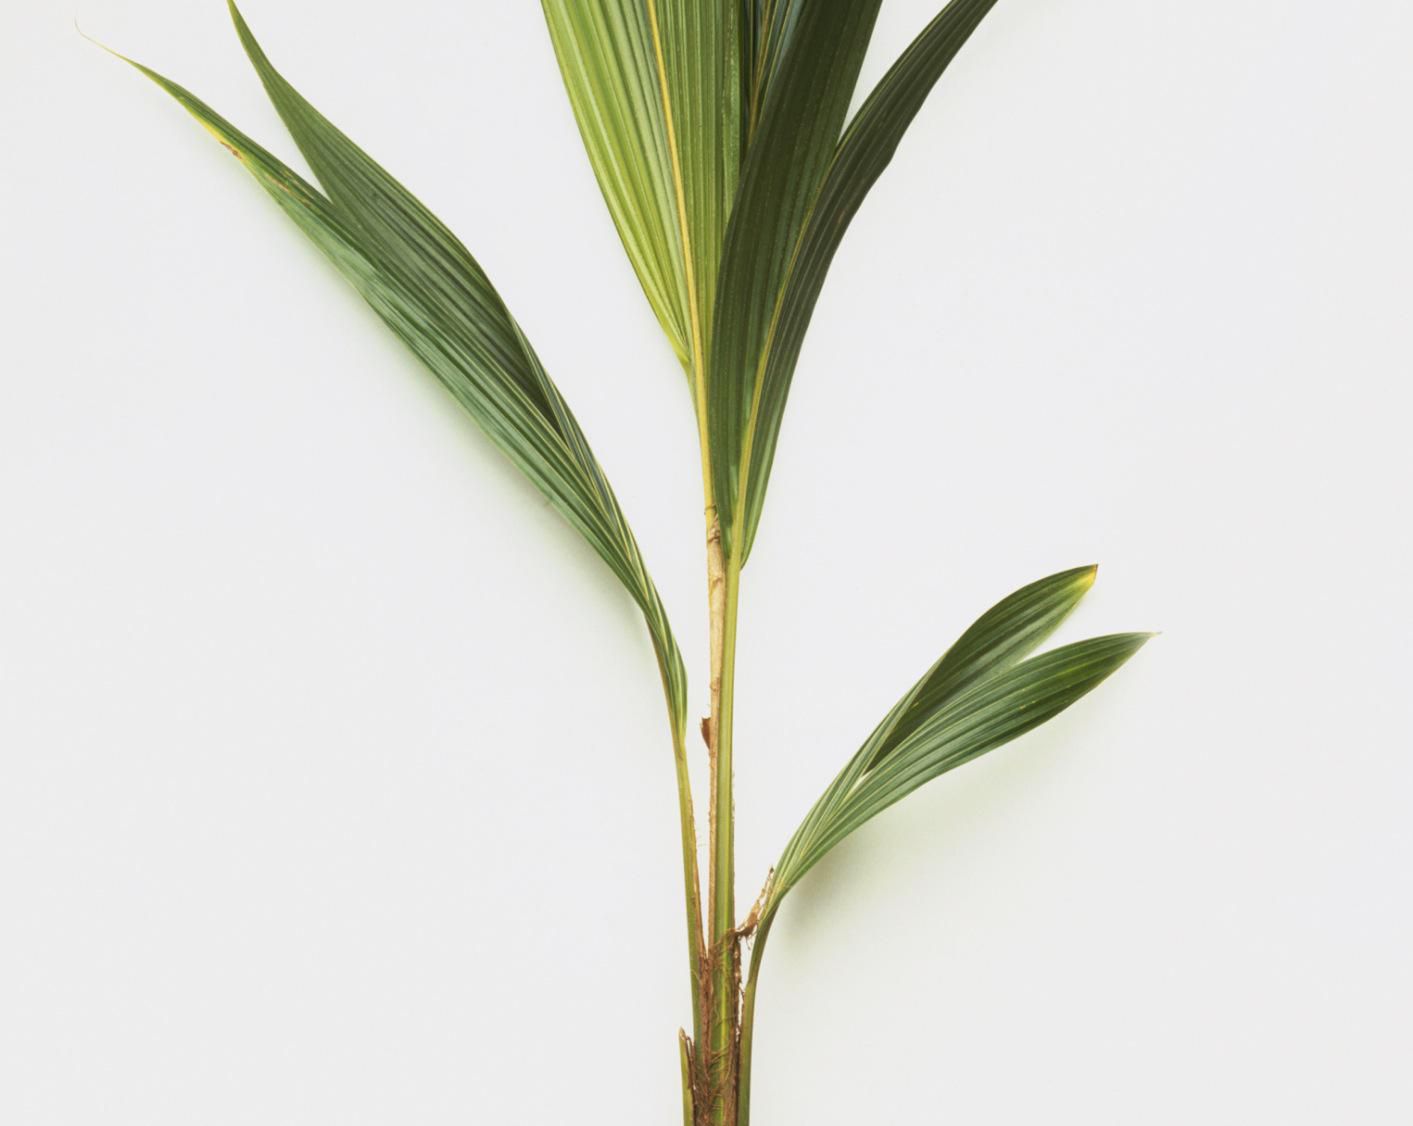 Growing Coconut Palms as a House Plant